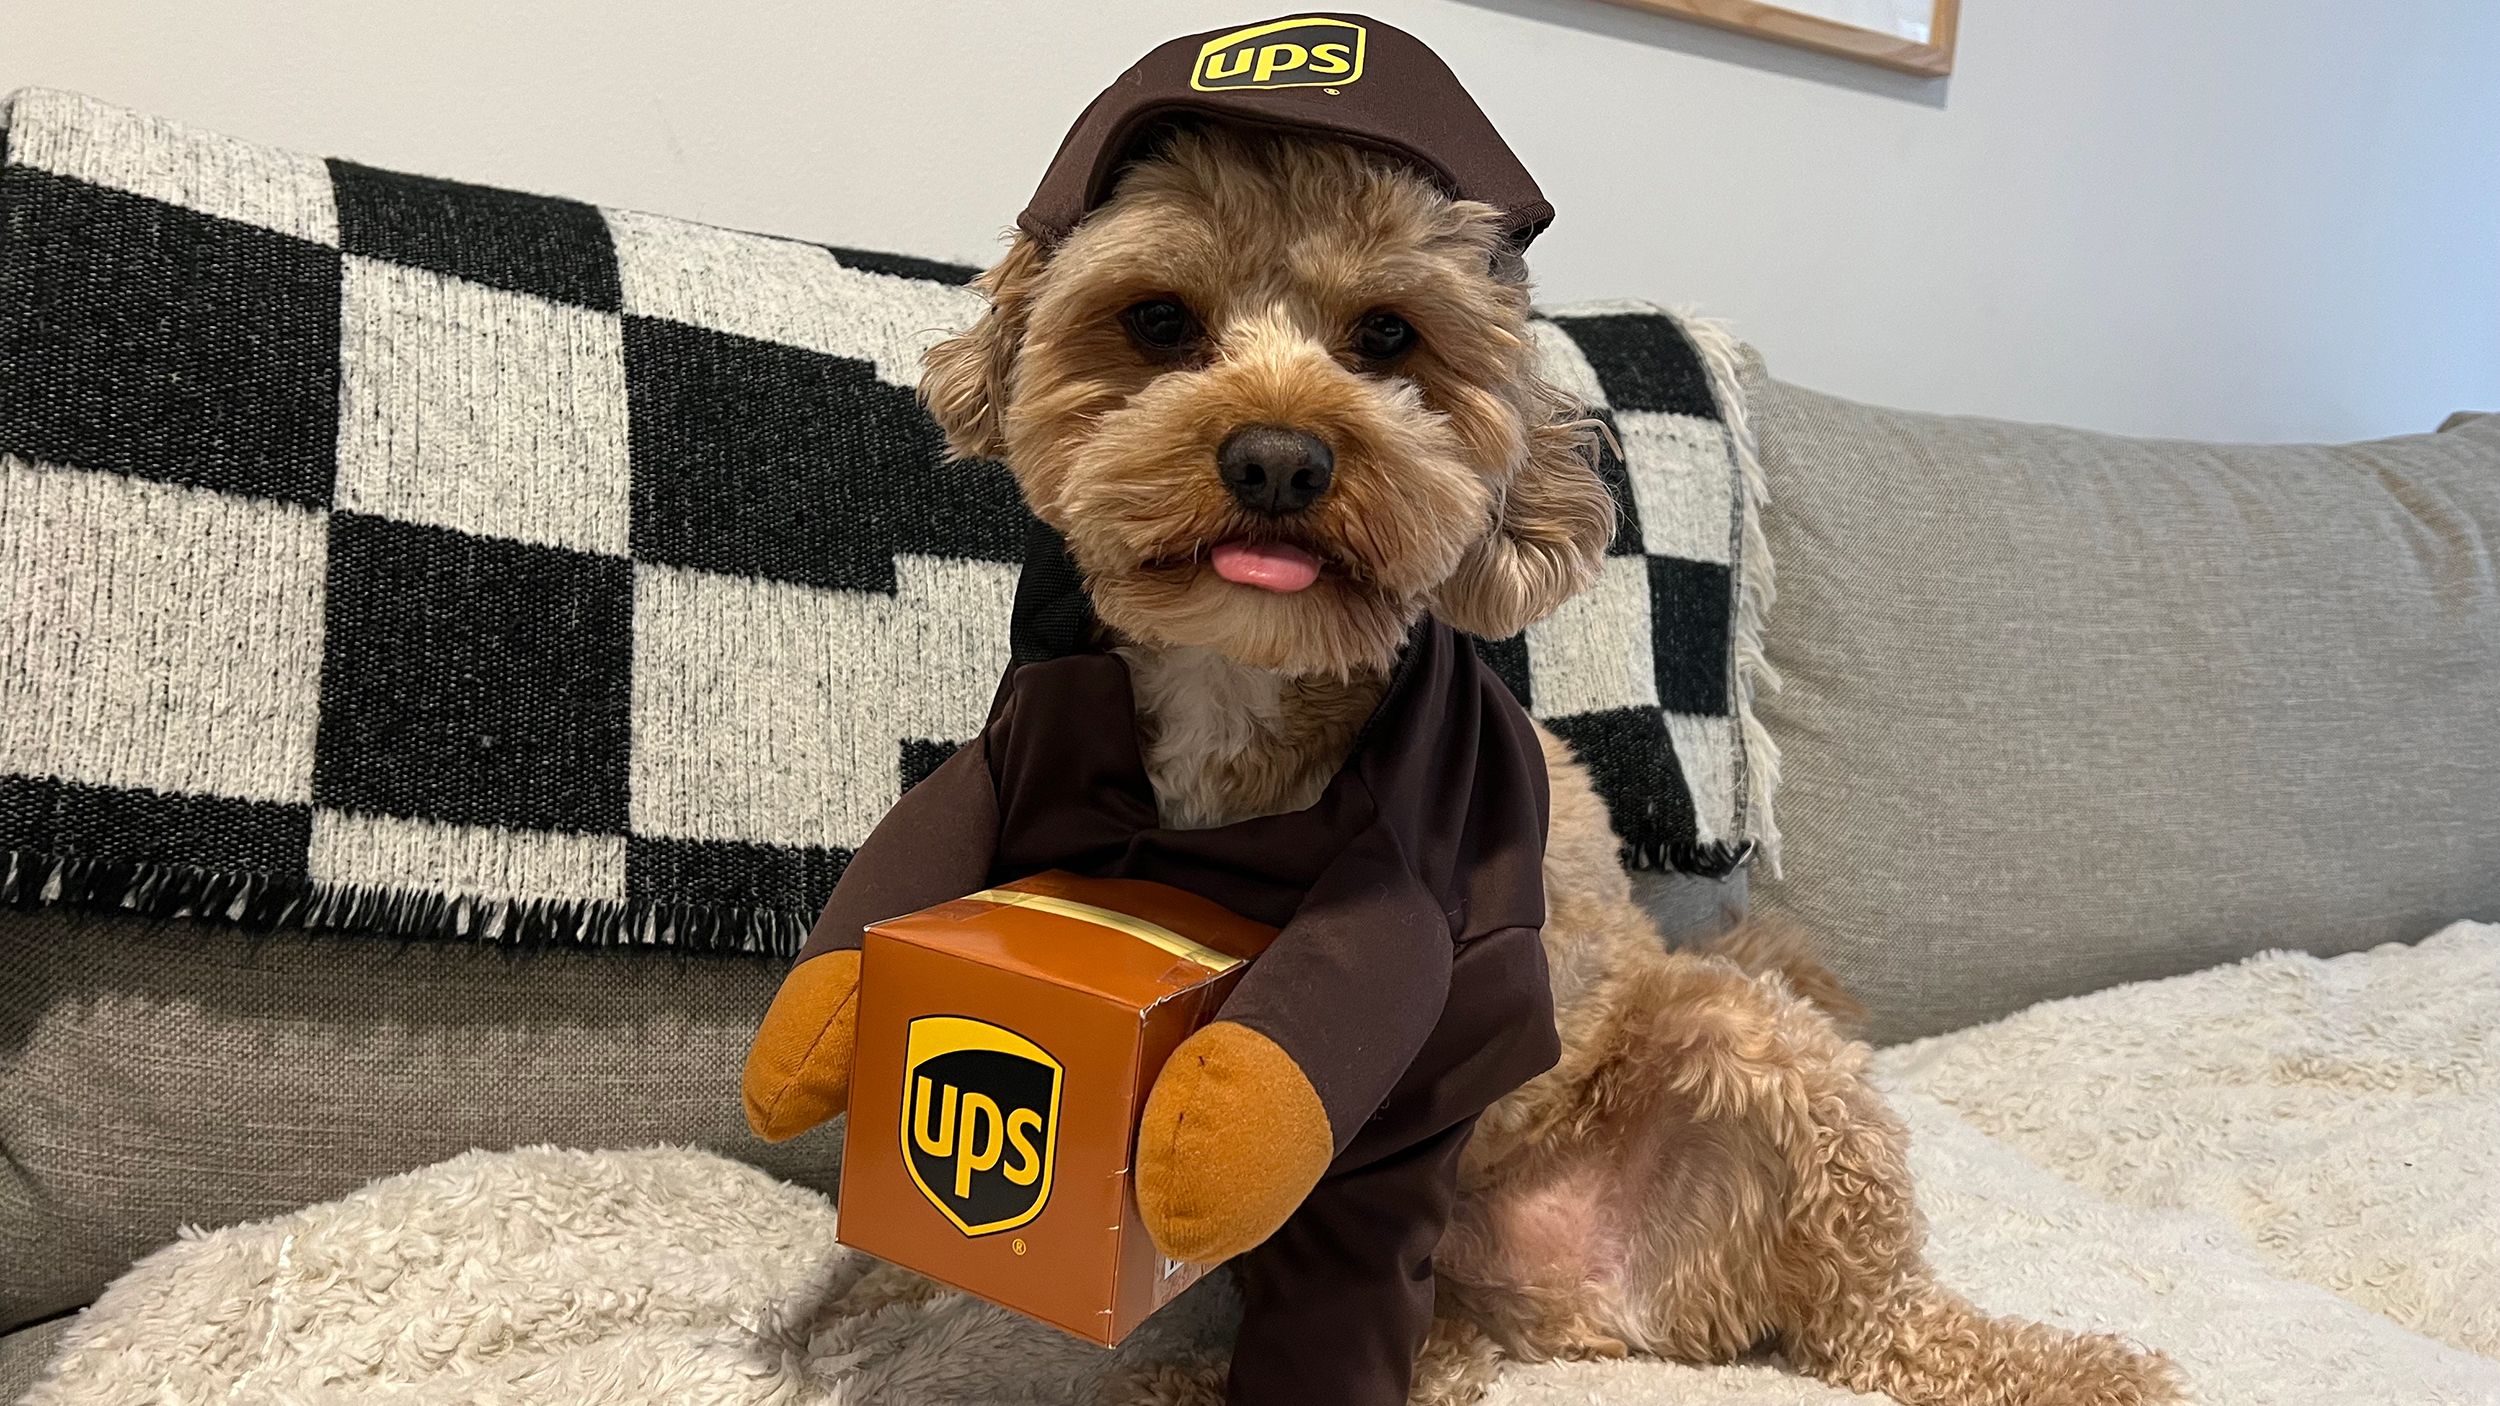 READY TO SHIP Silly Dog Mascot Costume 